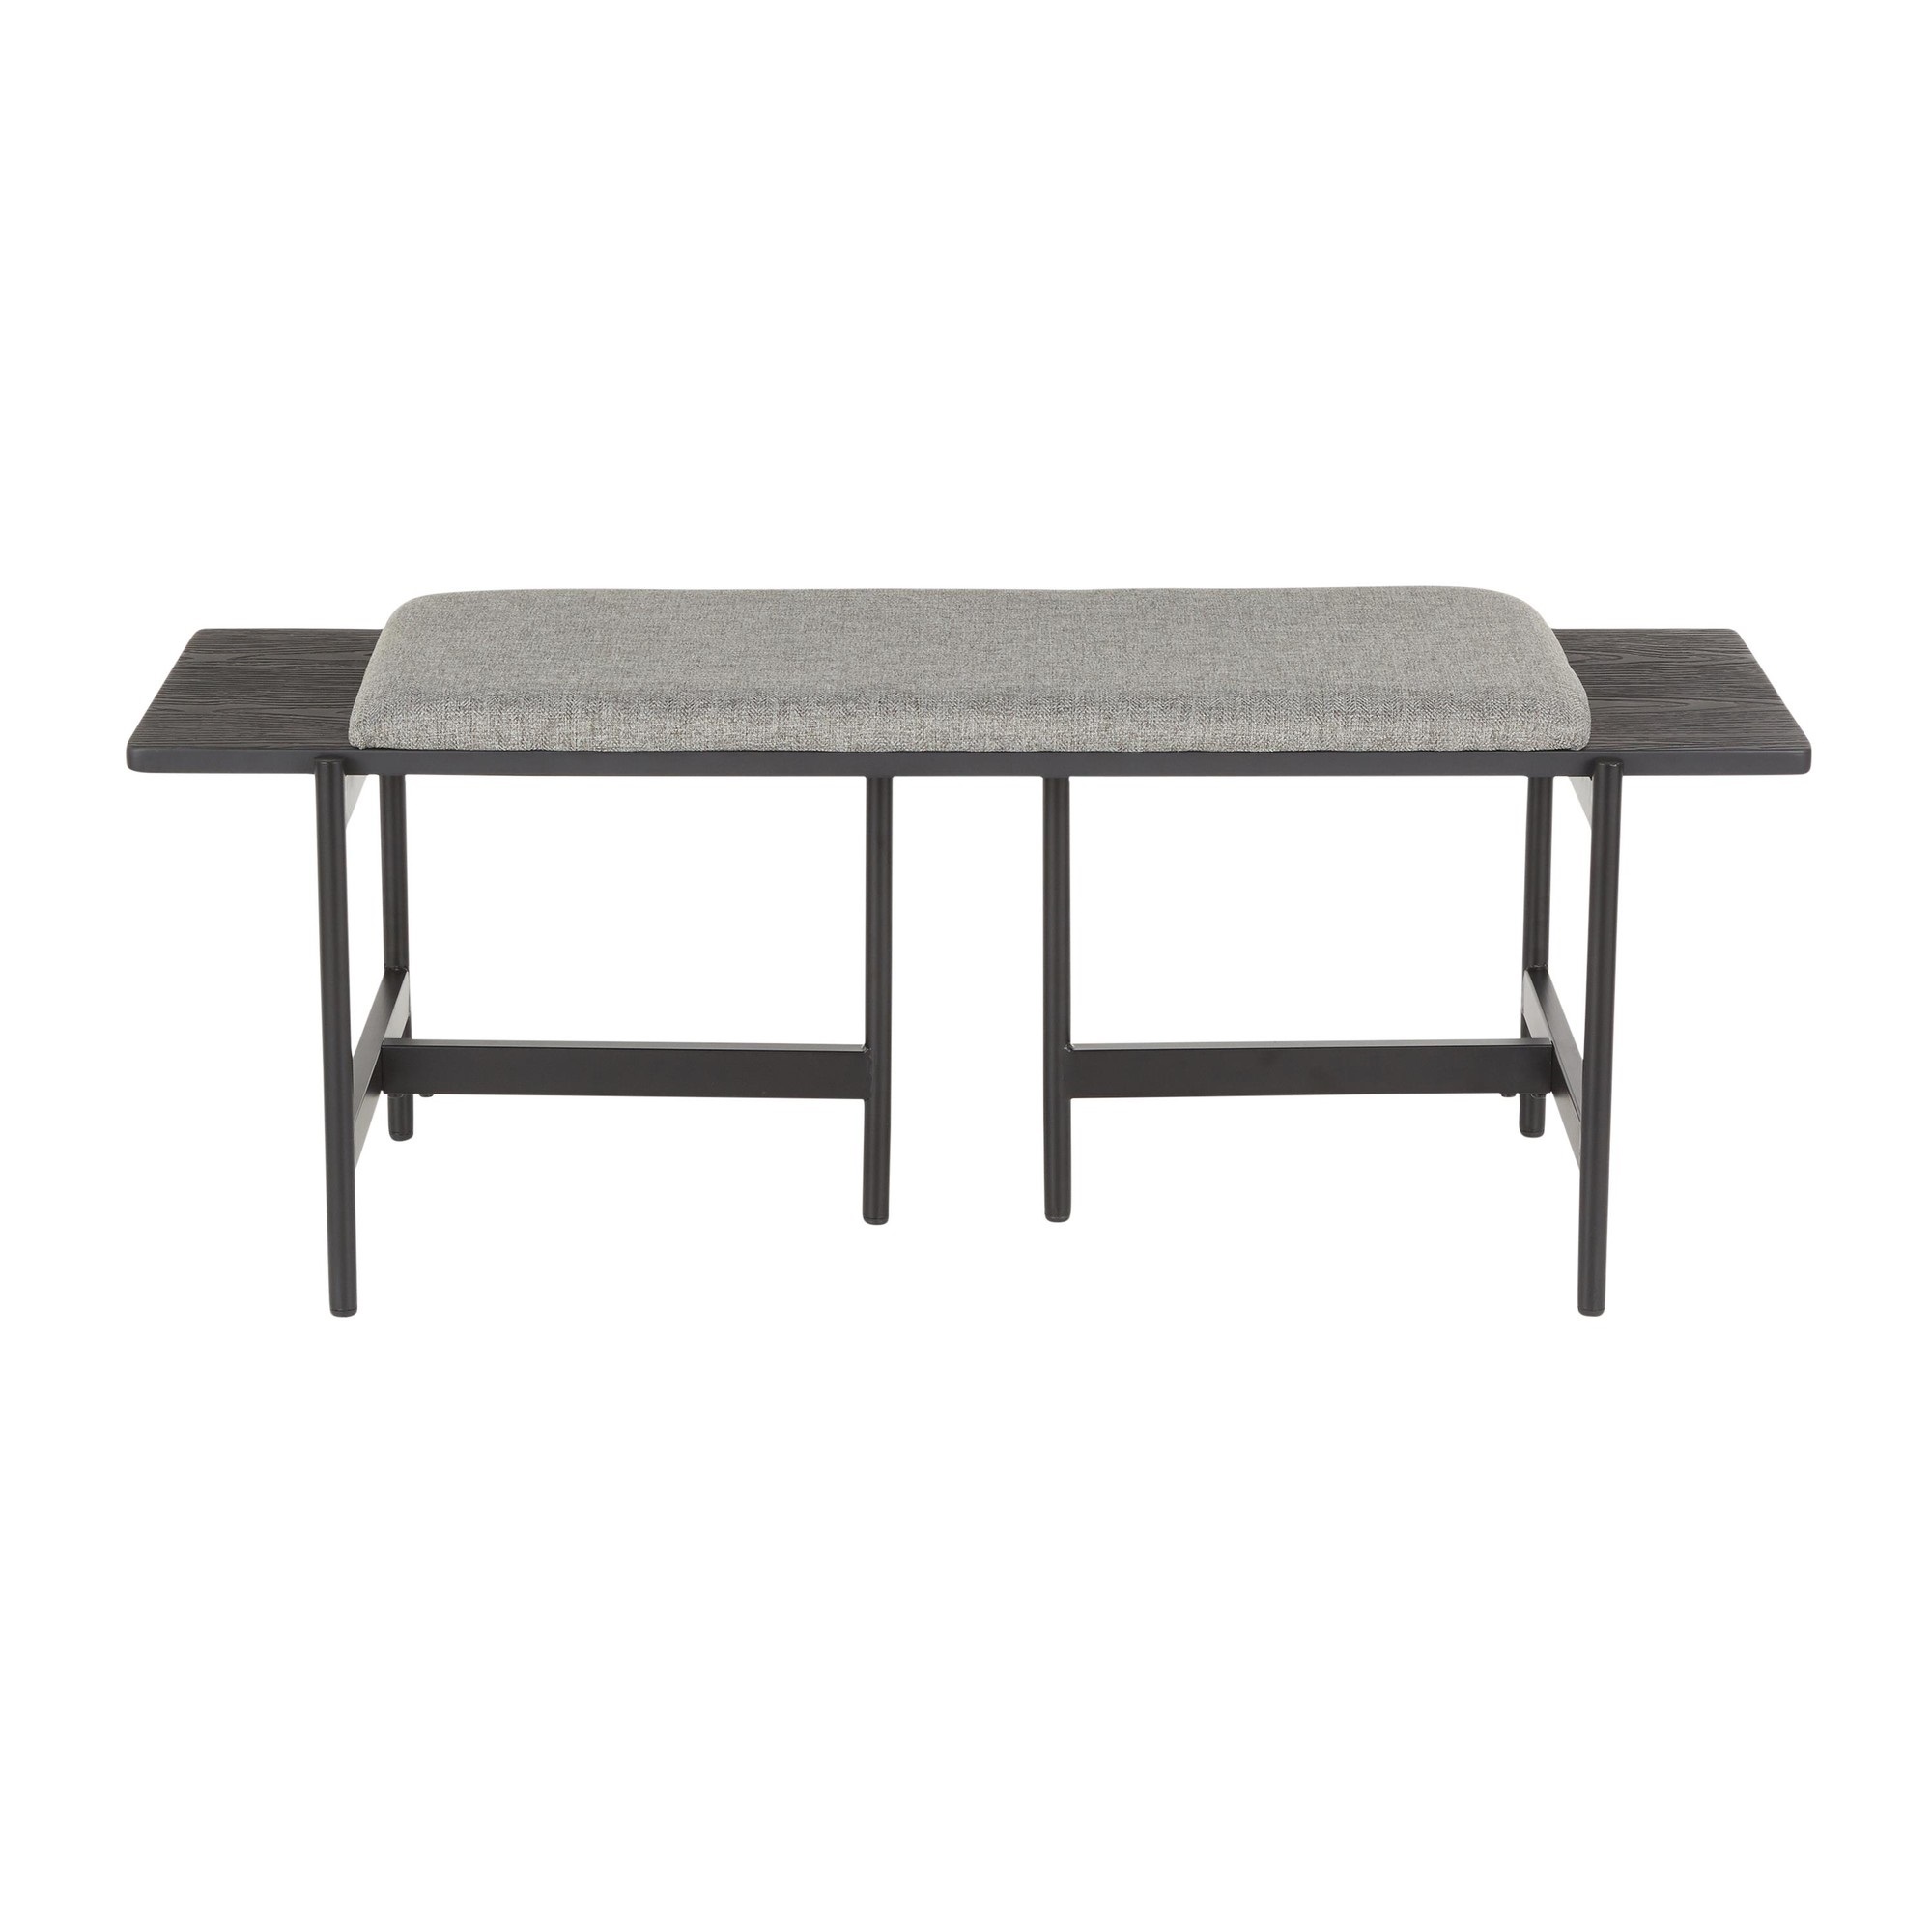 Chloe Contemporary Bench in Black Metal and Grey Fabric with Black Wood Accents by LumiSource - image 4 of 6